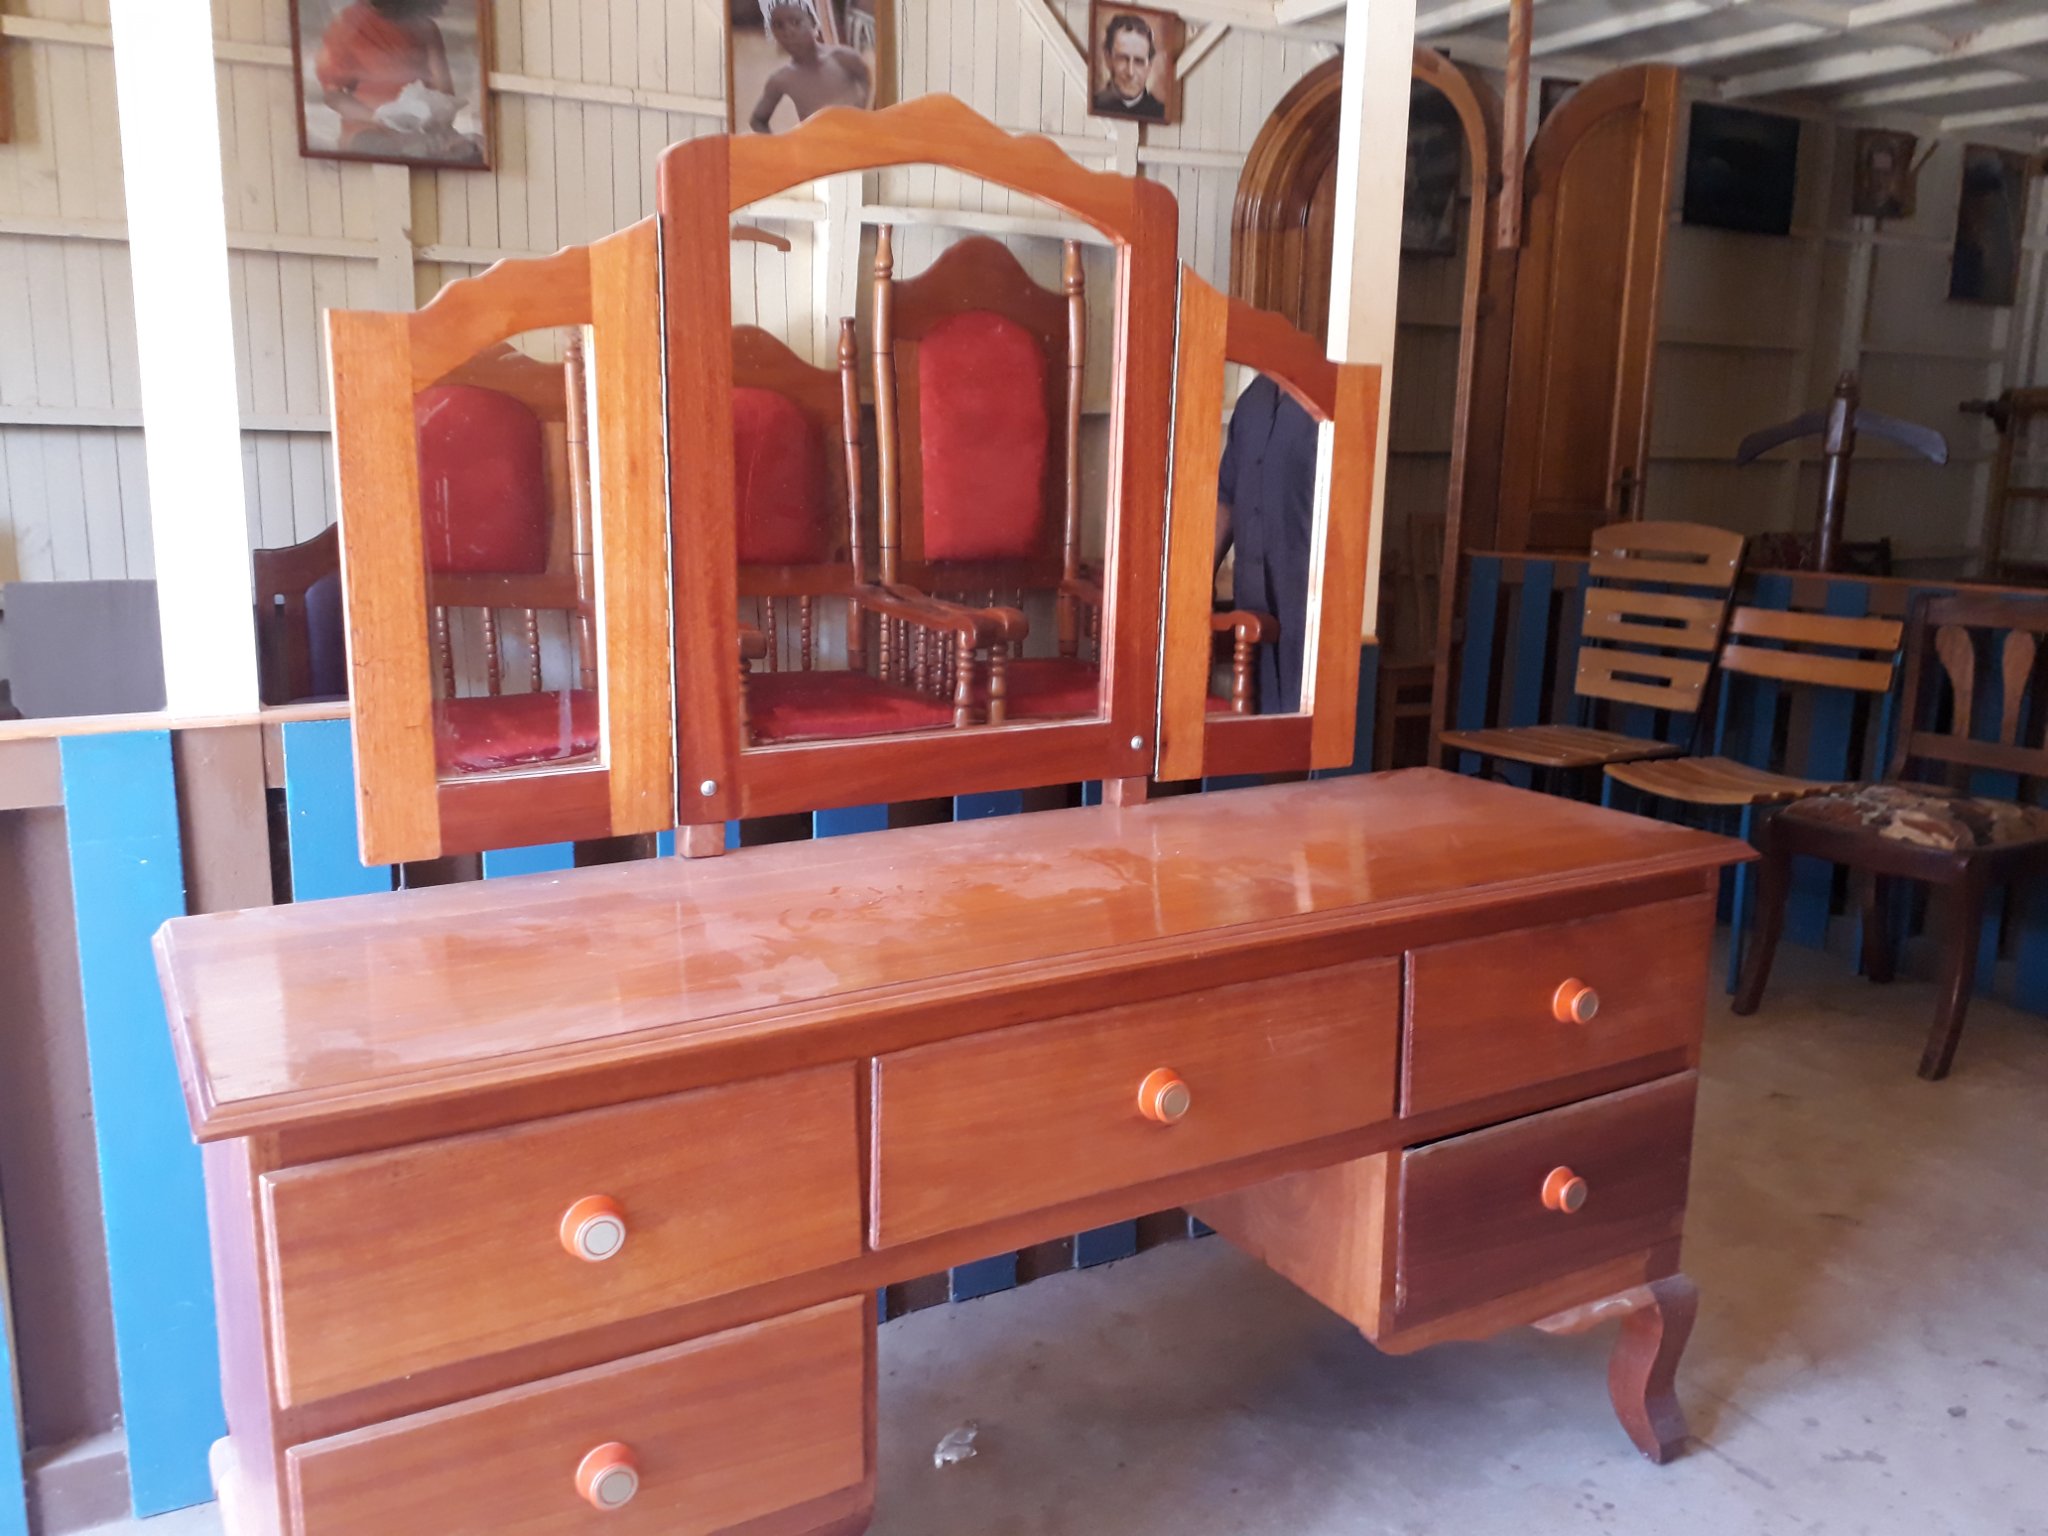 Dressing mirror and table